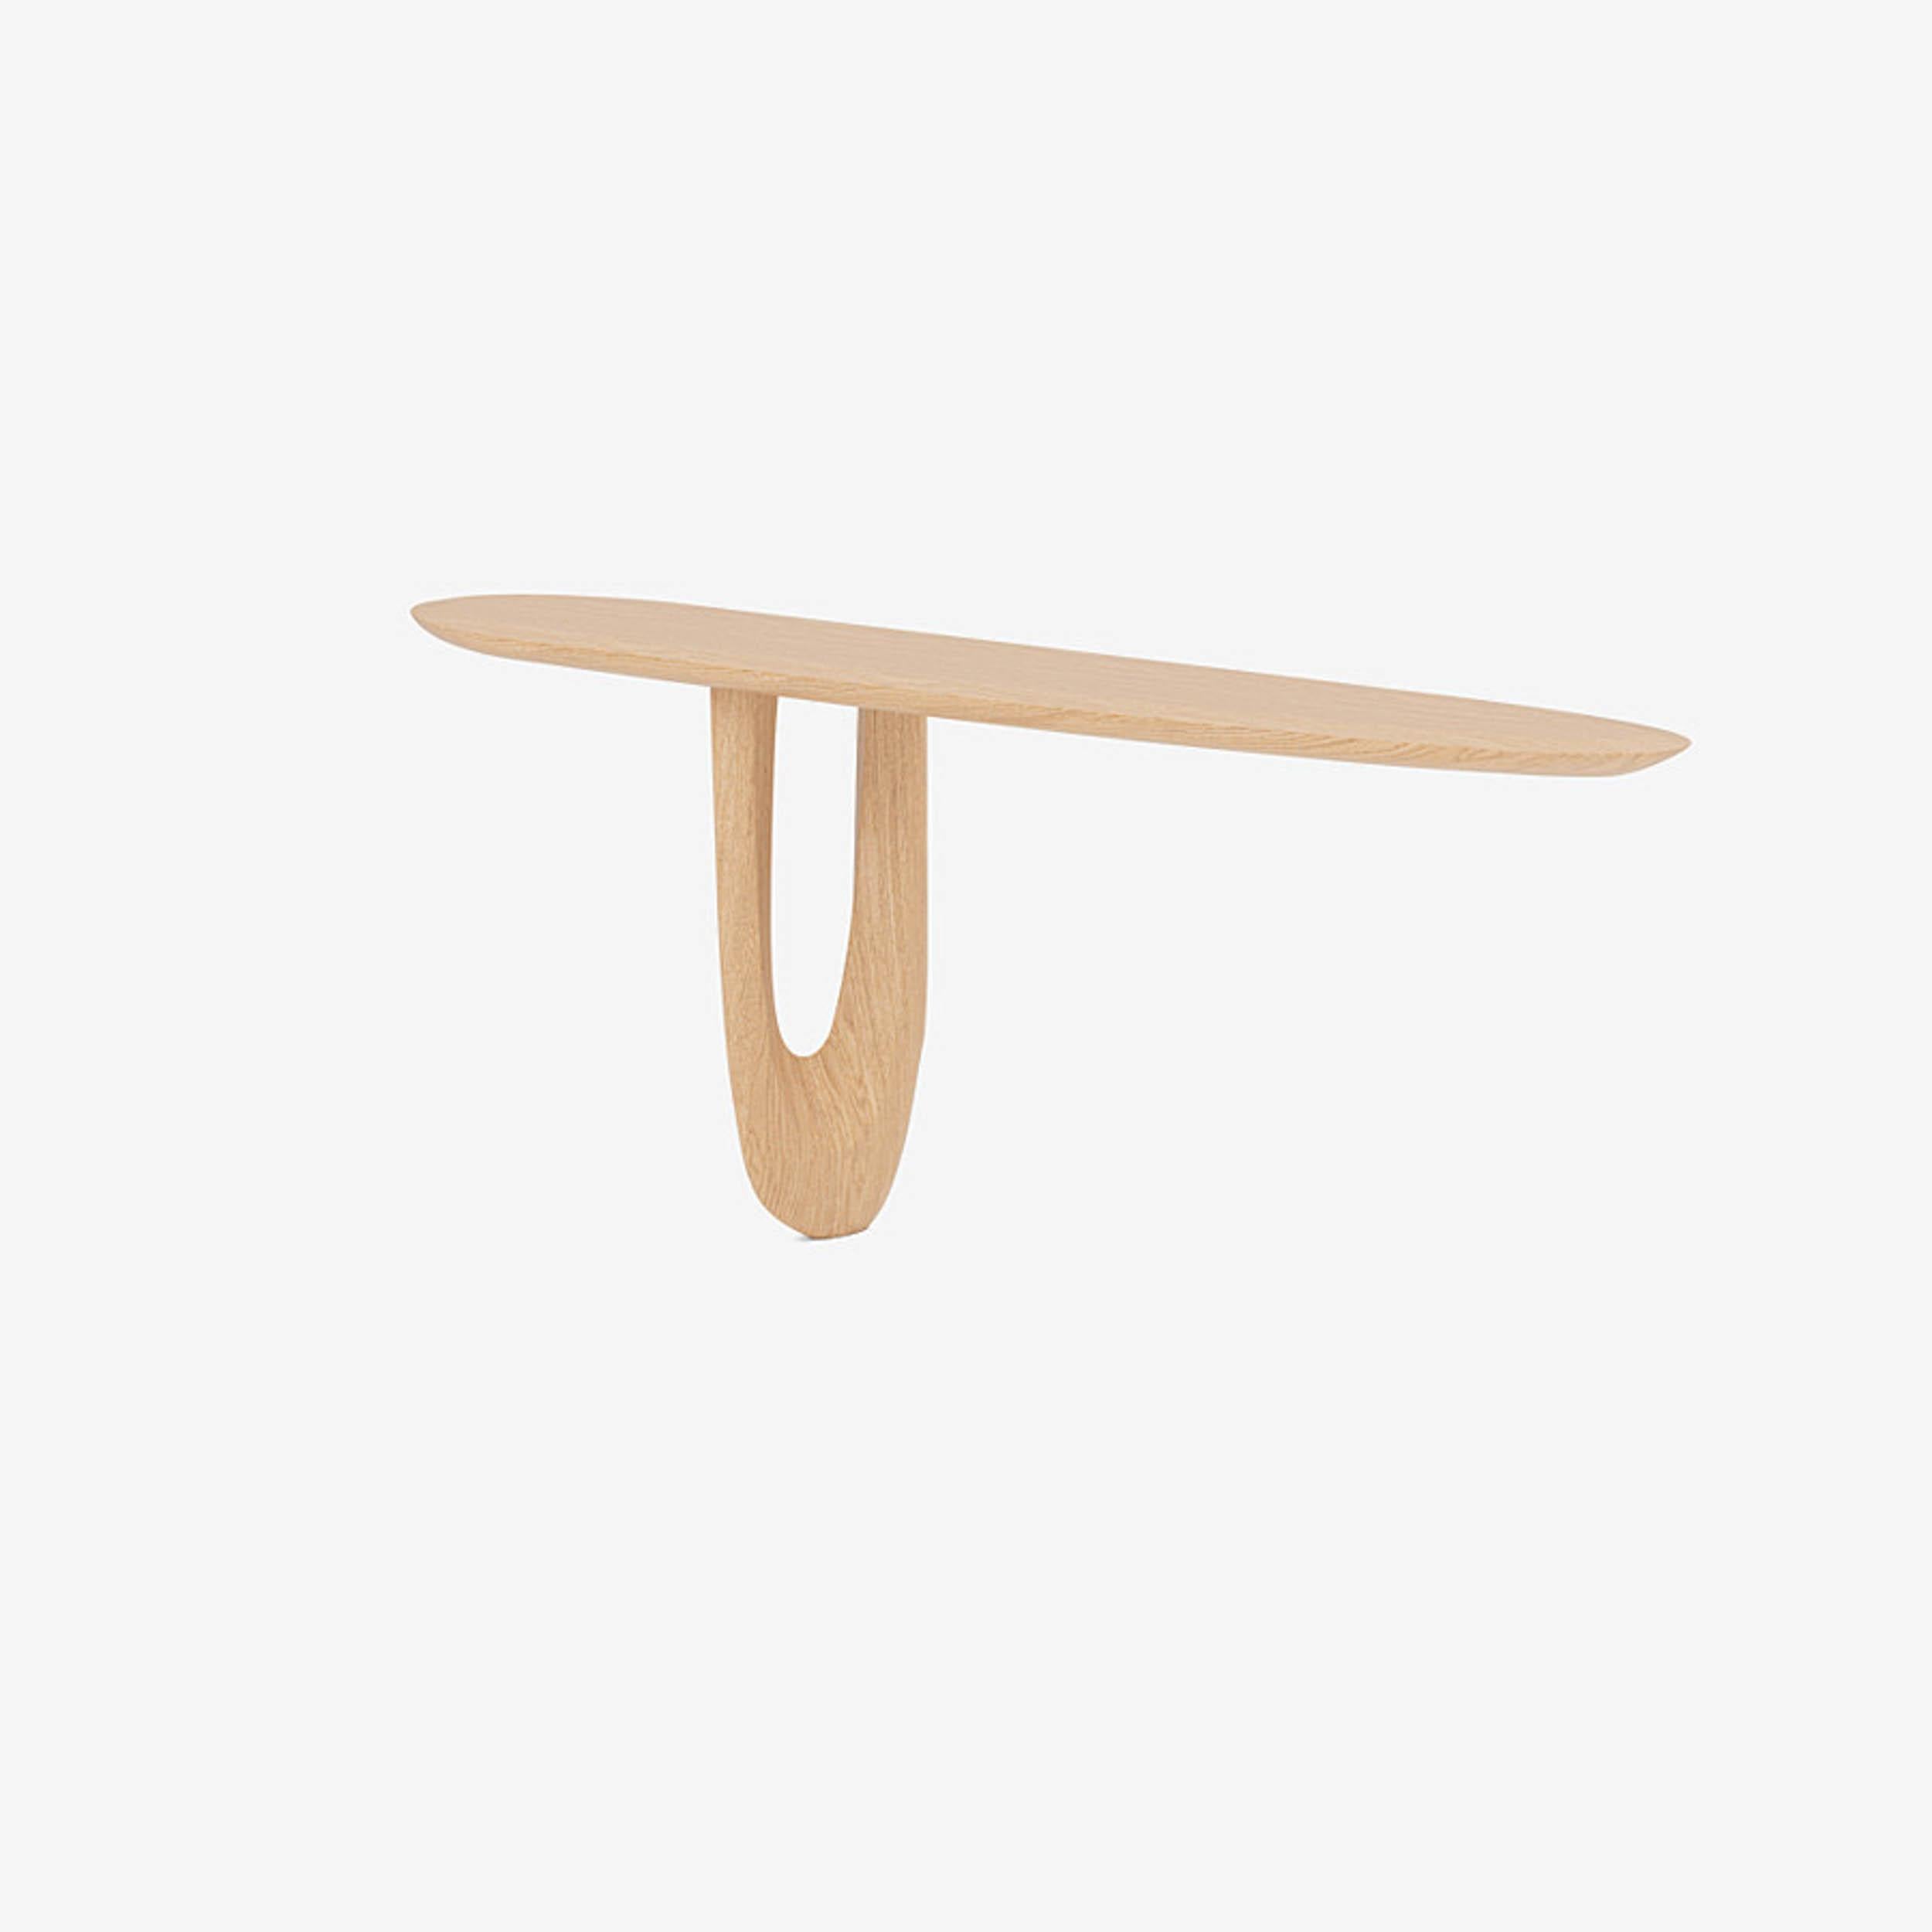 'Savignyplatz' Console Table by Man of Parts
Signed by Sebastian Herkner 

Solid oak wood 

Finishes available: 
- Black 
- Mist
- Ivory
- Nude 
- Whiskey

Dimensions available:
S: H. 75 x 45 x 160 cm / M: H. 85 x 45 x 220 cm

Model shown: Nude oak,